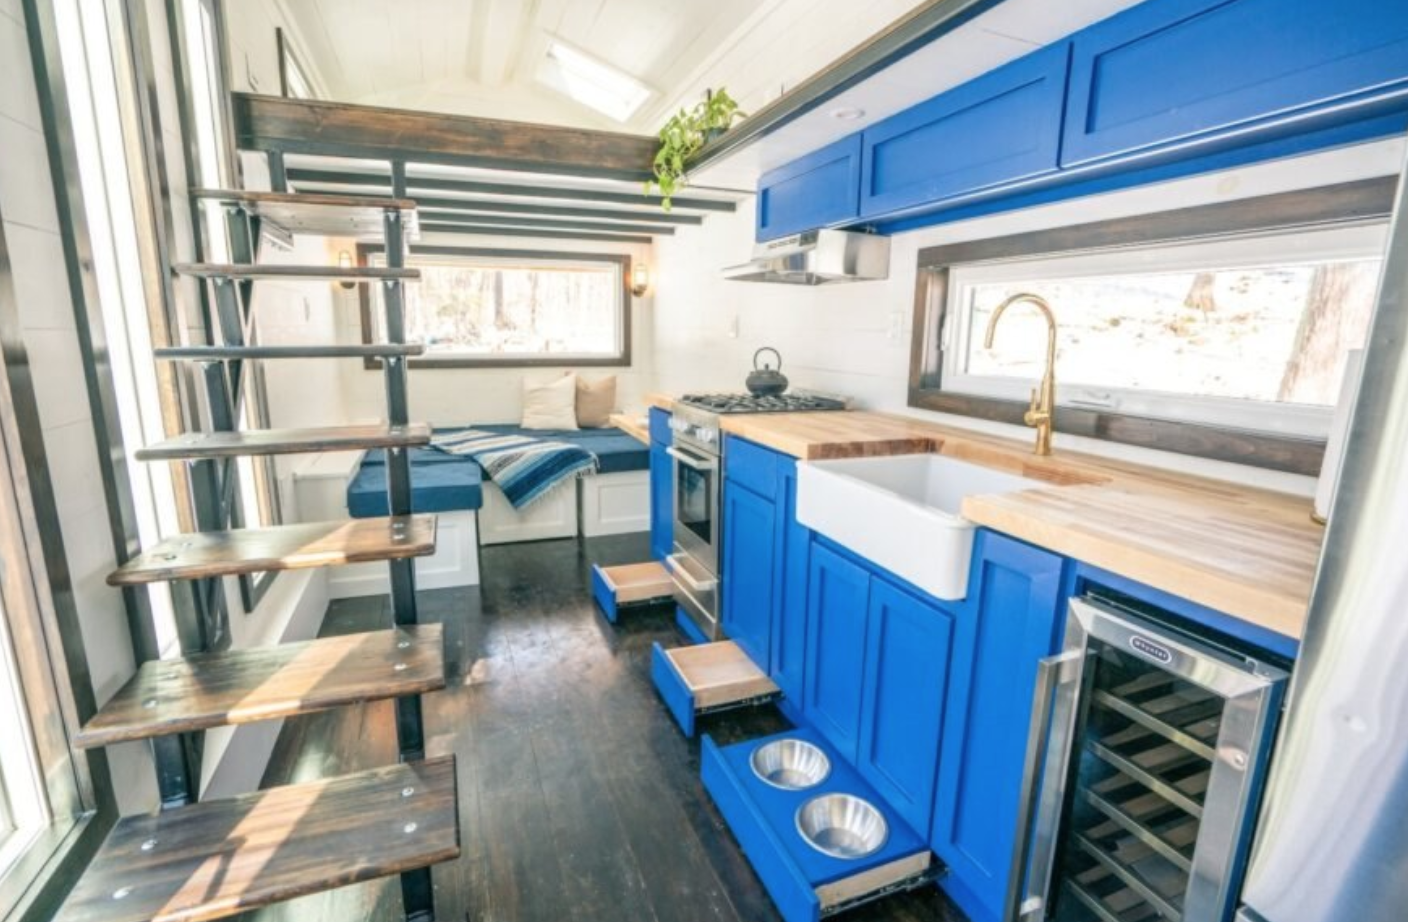 Living Off Grid - Ark Tiny Home Blends Offgrid Capability with Elevated Design 